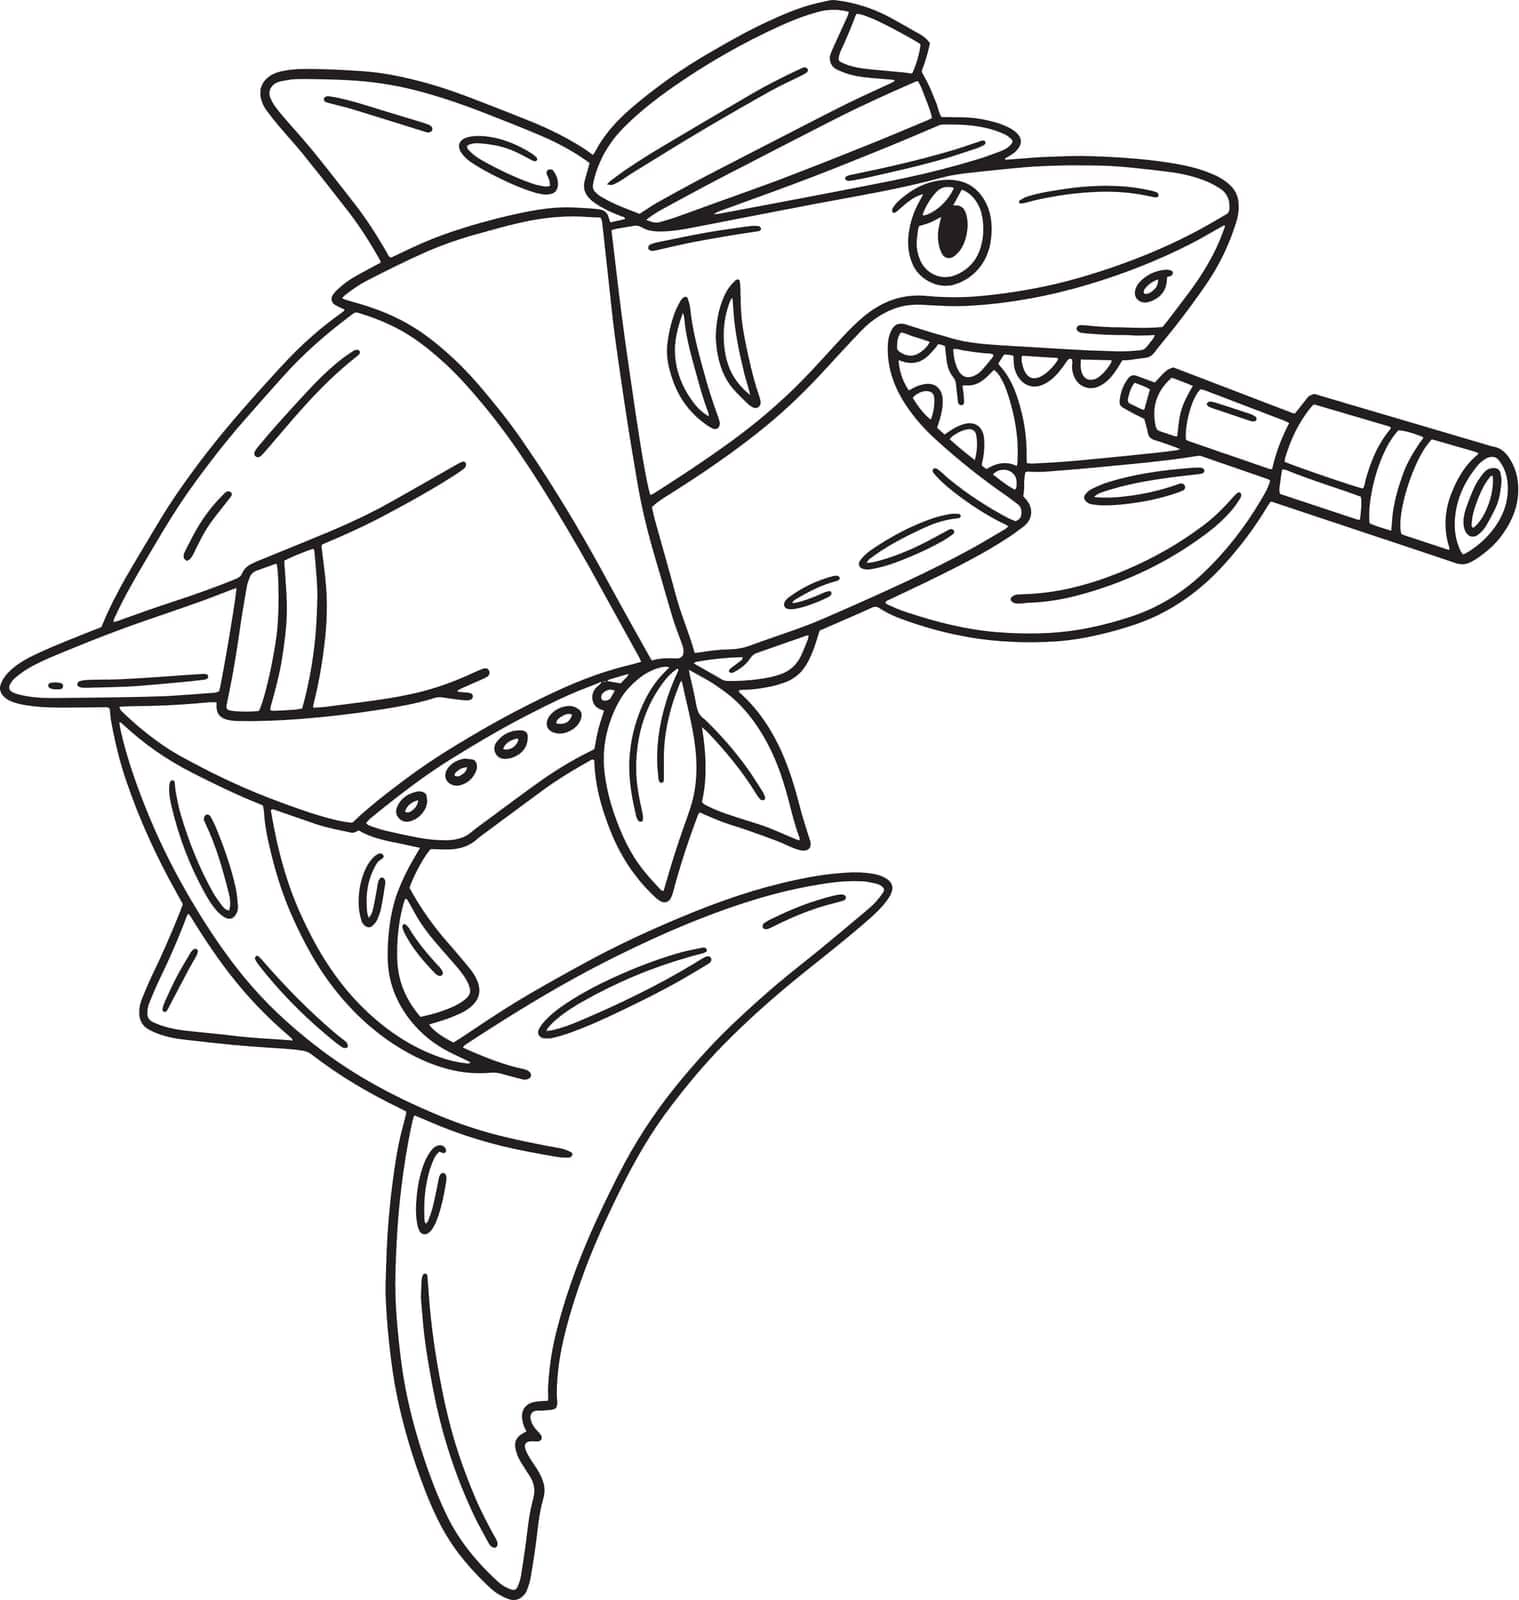 Shark n Marine Outfit Isolated Coloring Page by abbydesign